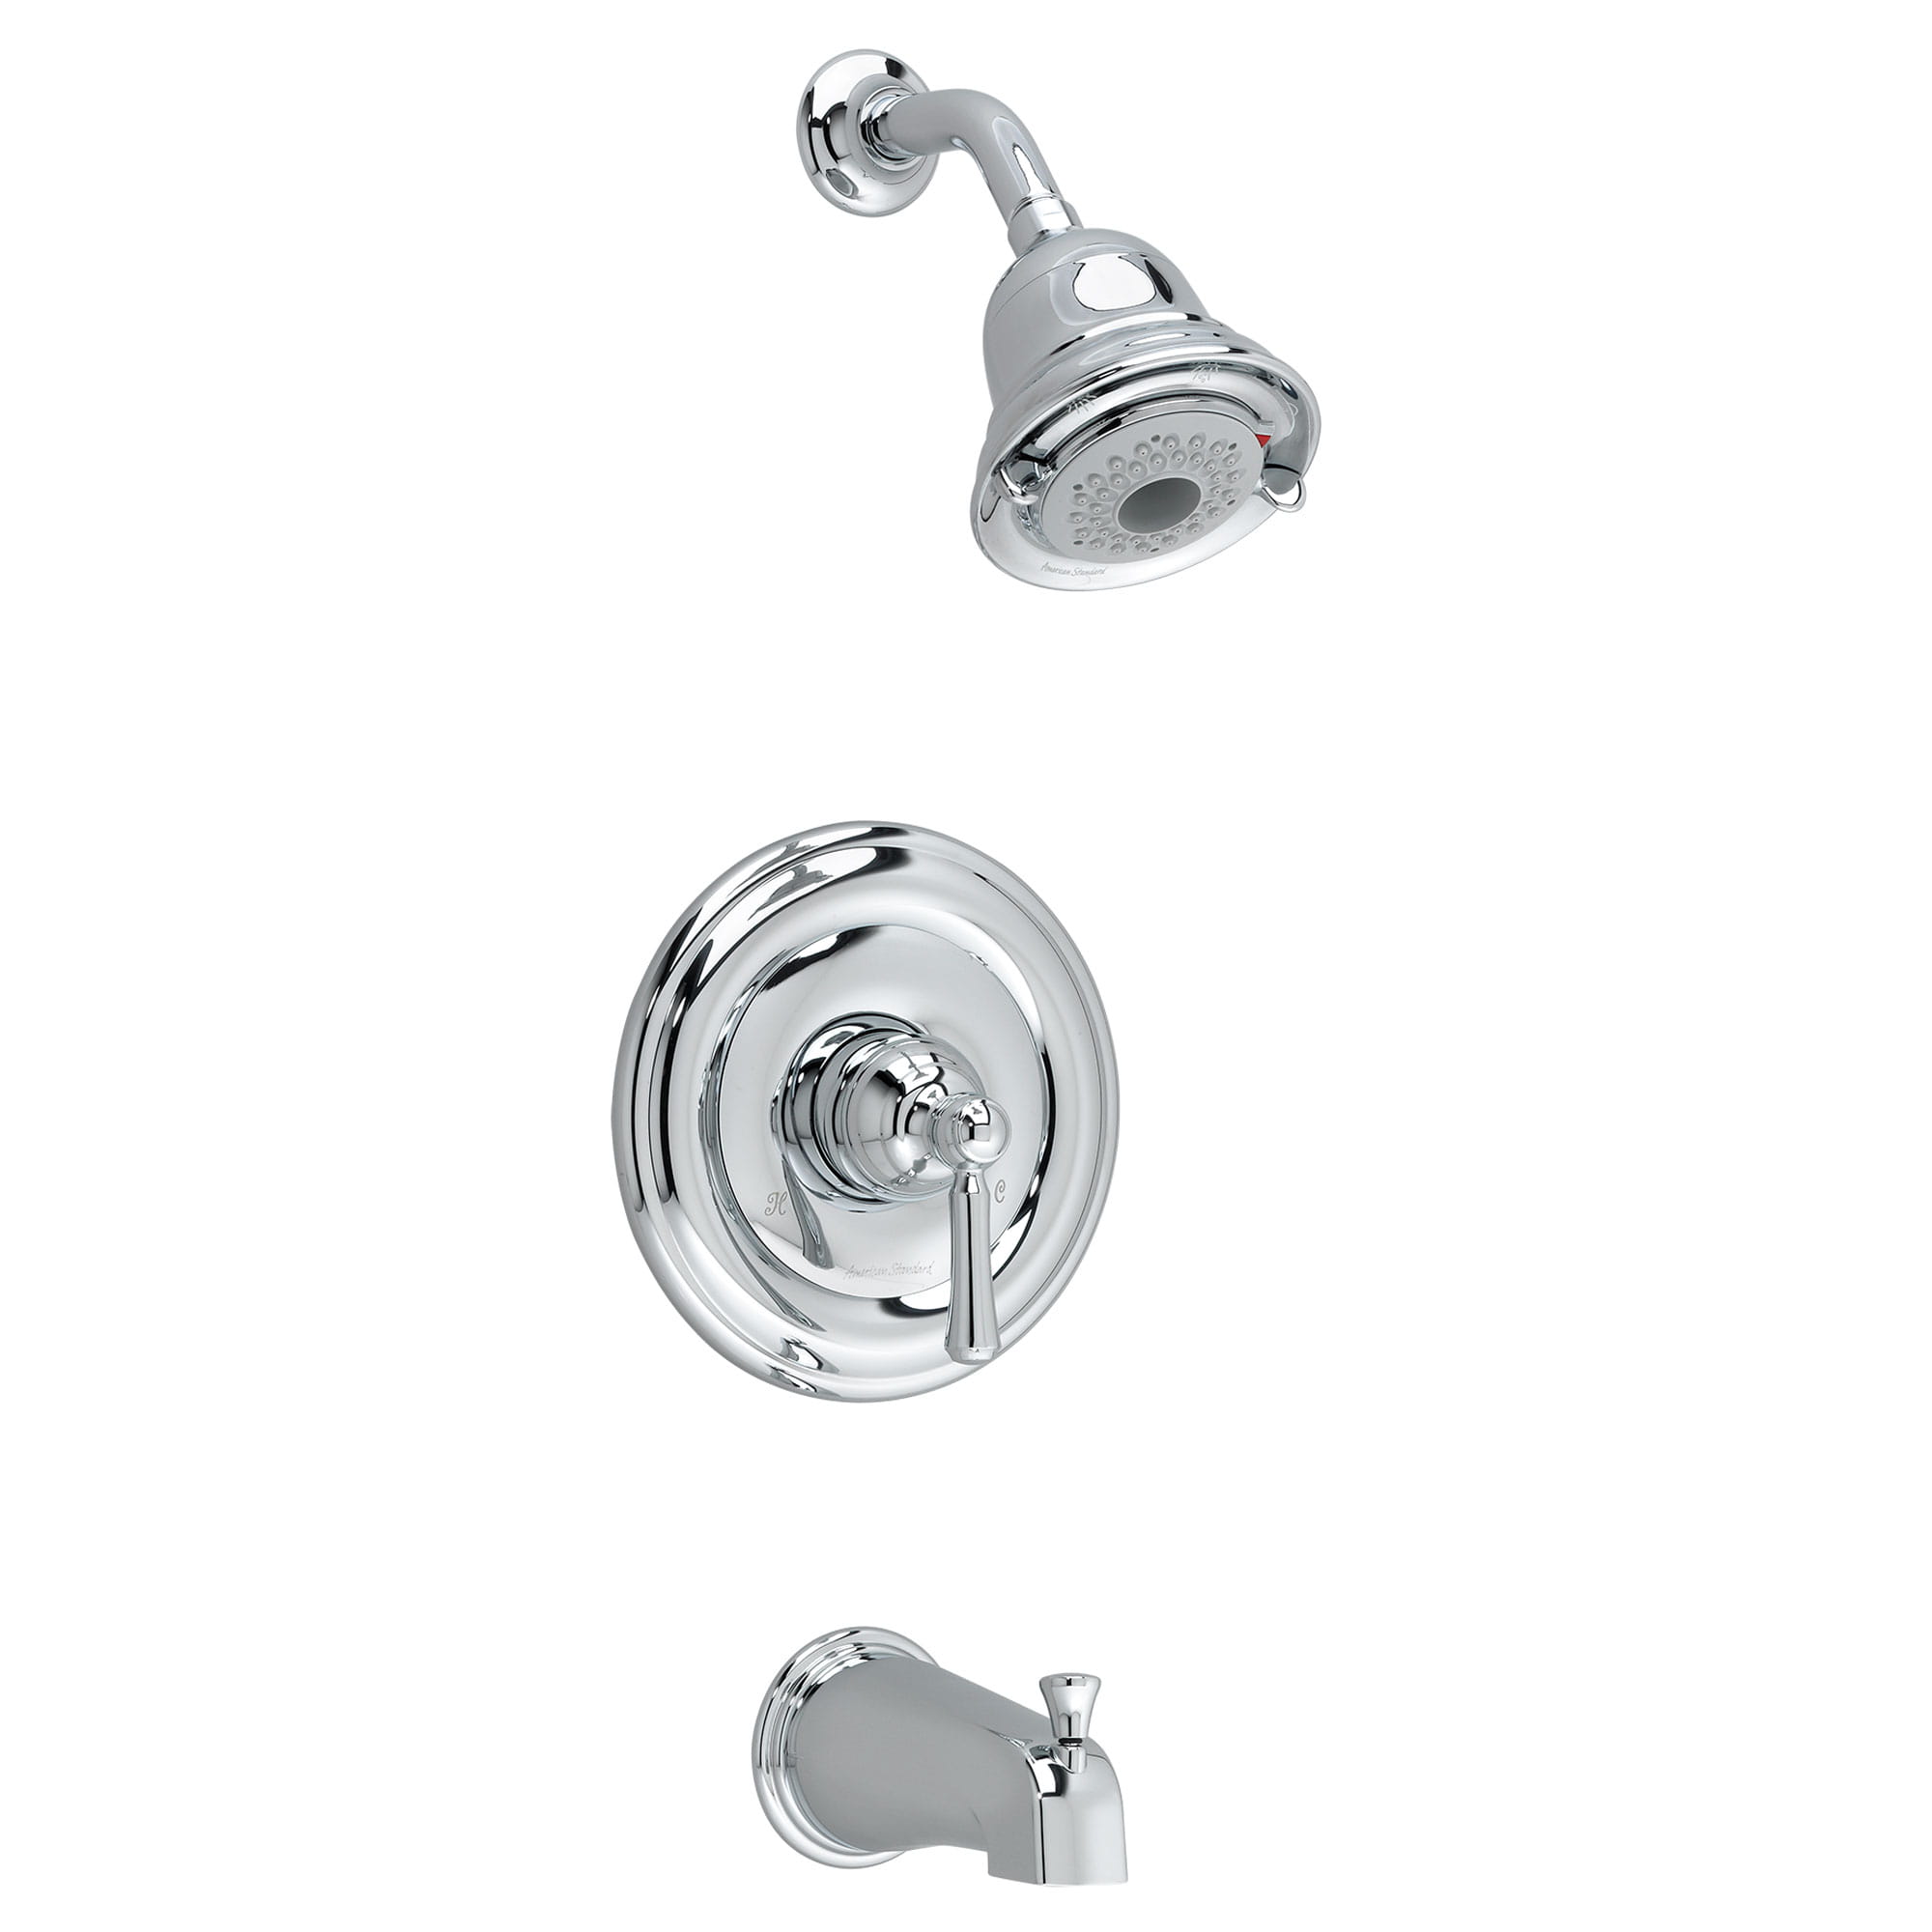 Portsmouth 20 GPM Tub and Shower Trim Kit with FloWise Showerhead and Lever Handle CHROME